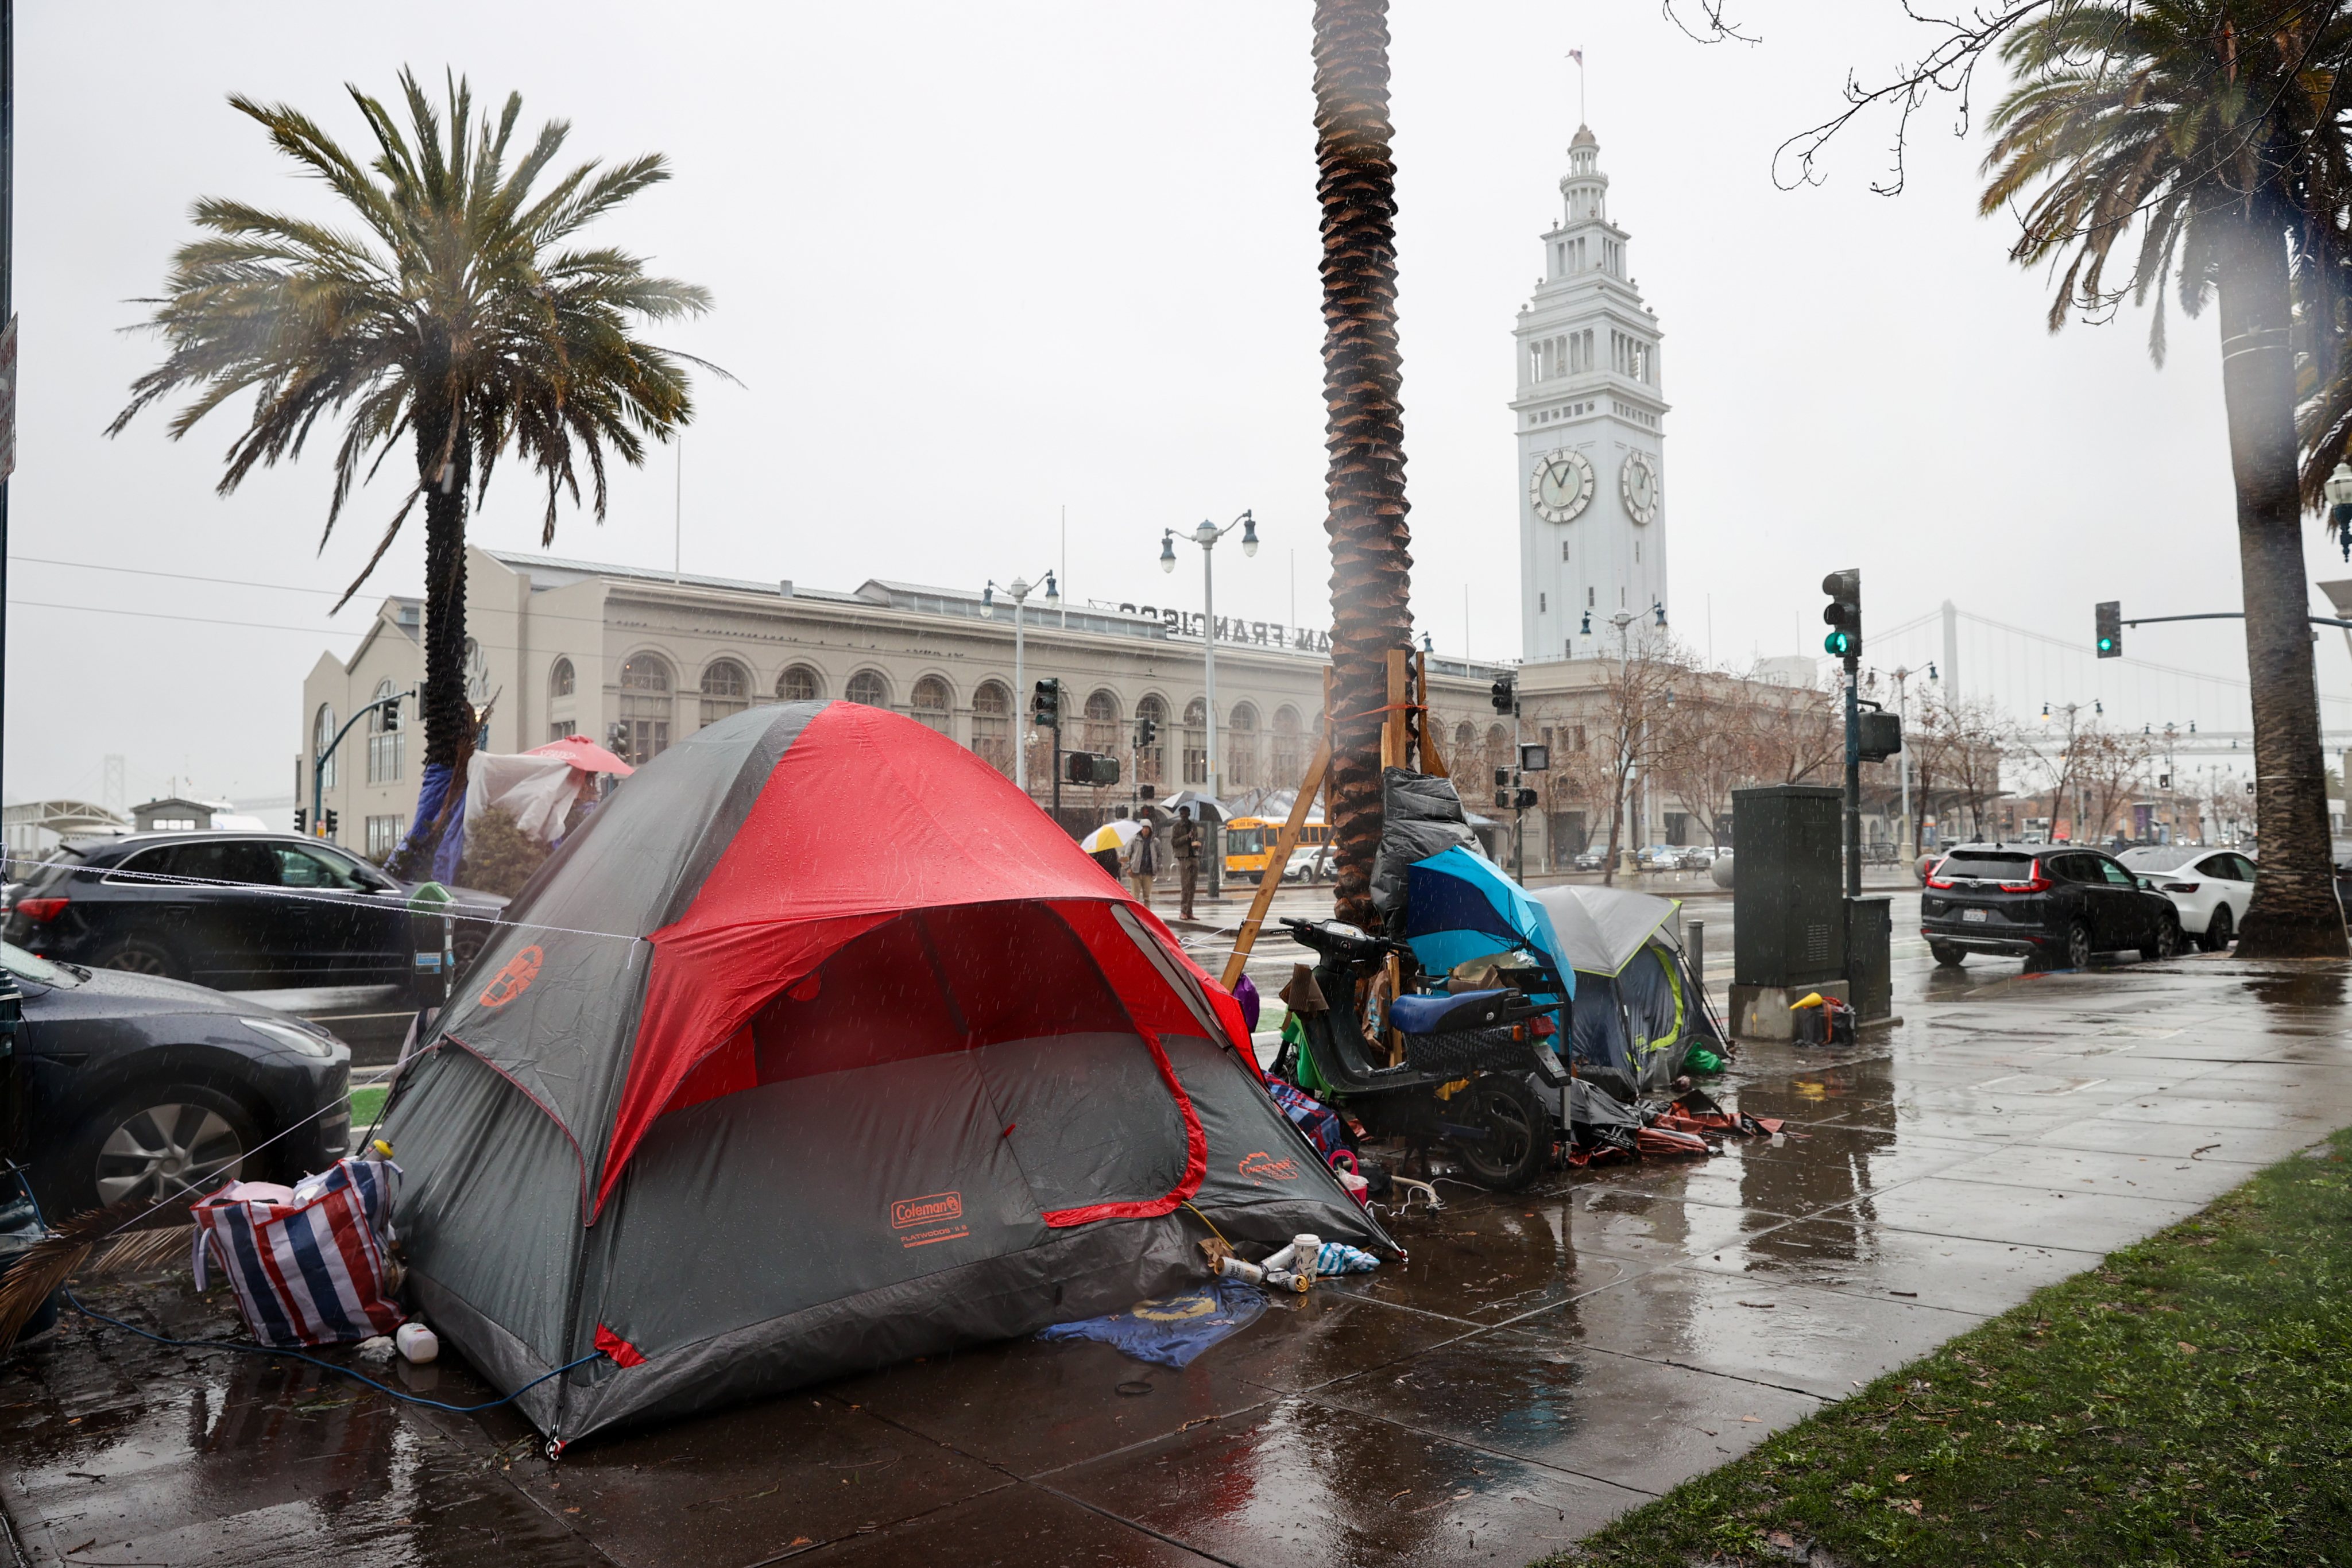 Homelessness in San Francisco during winter